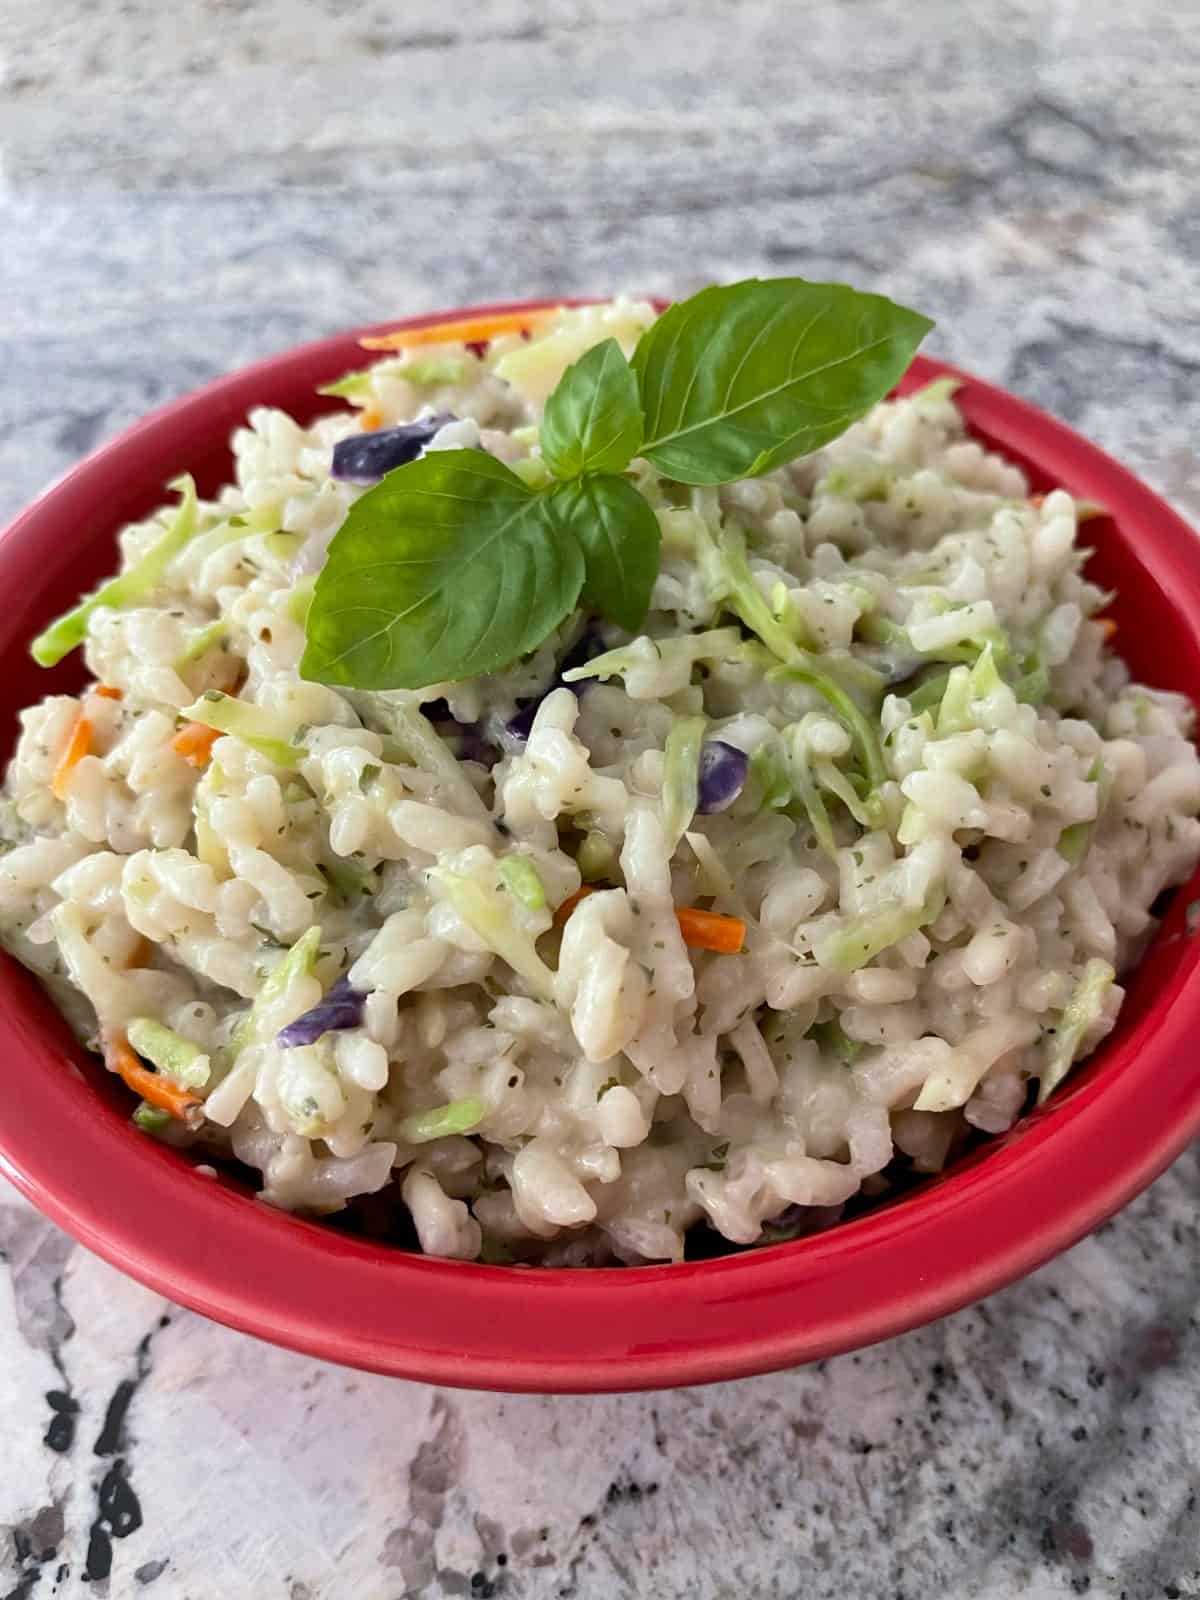 Creamy broccoli slaw risotto topped with fresh basil in red serving bowl.